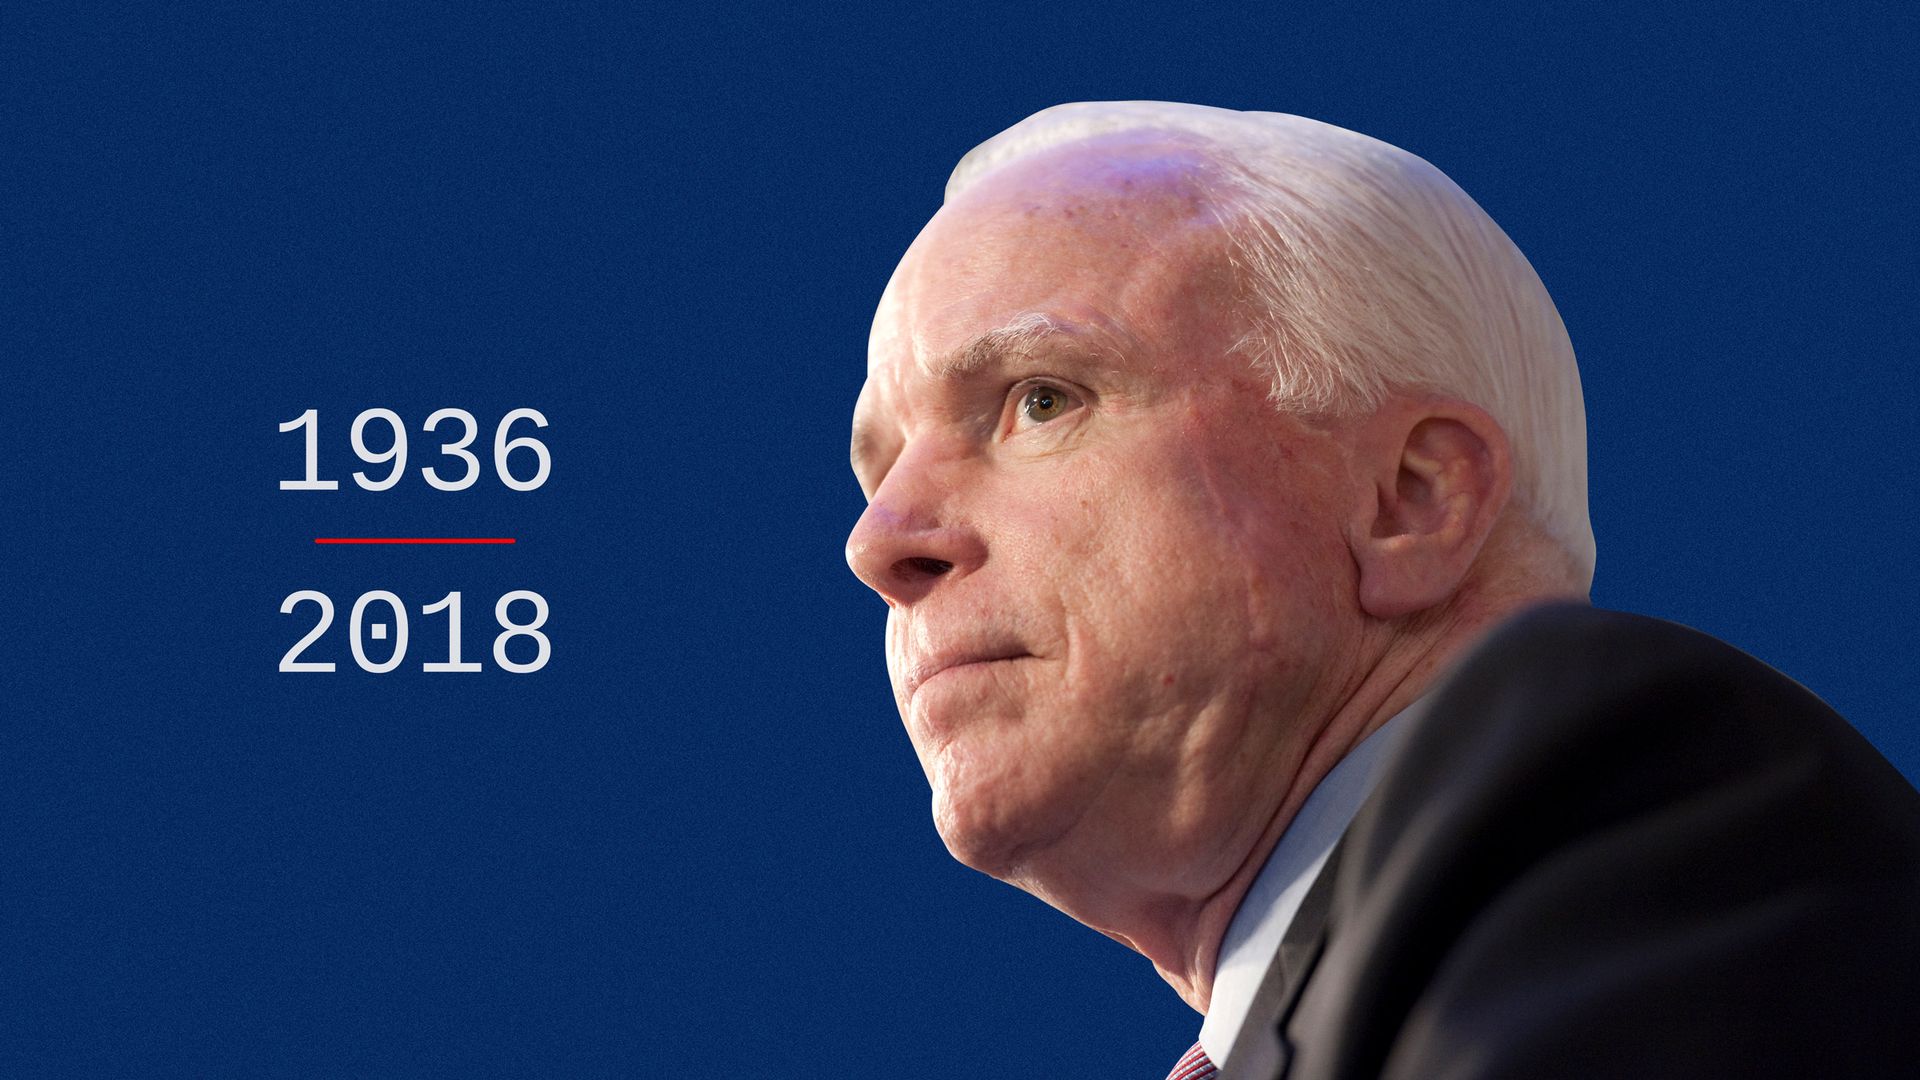 A photo of John McCain listing the years of his birth and death -- 1936 and 2018